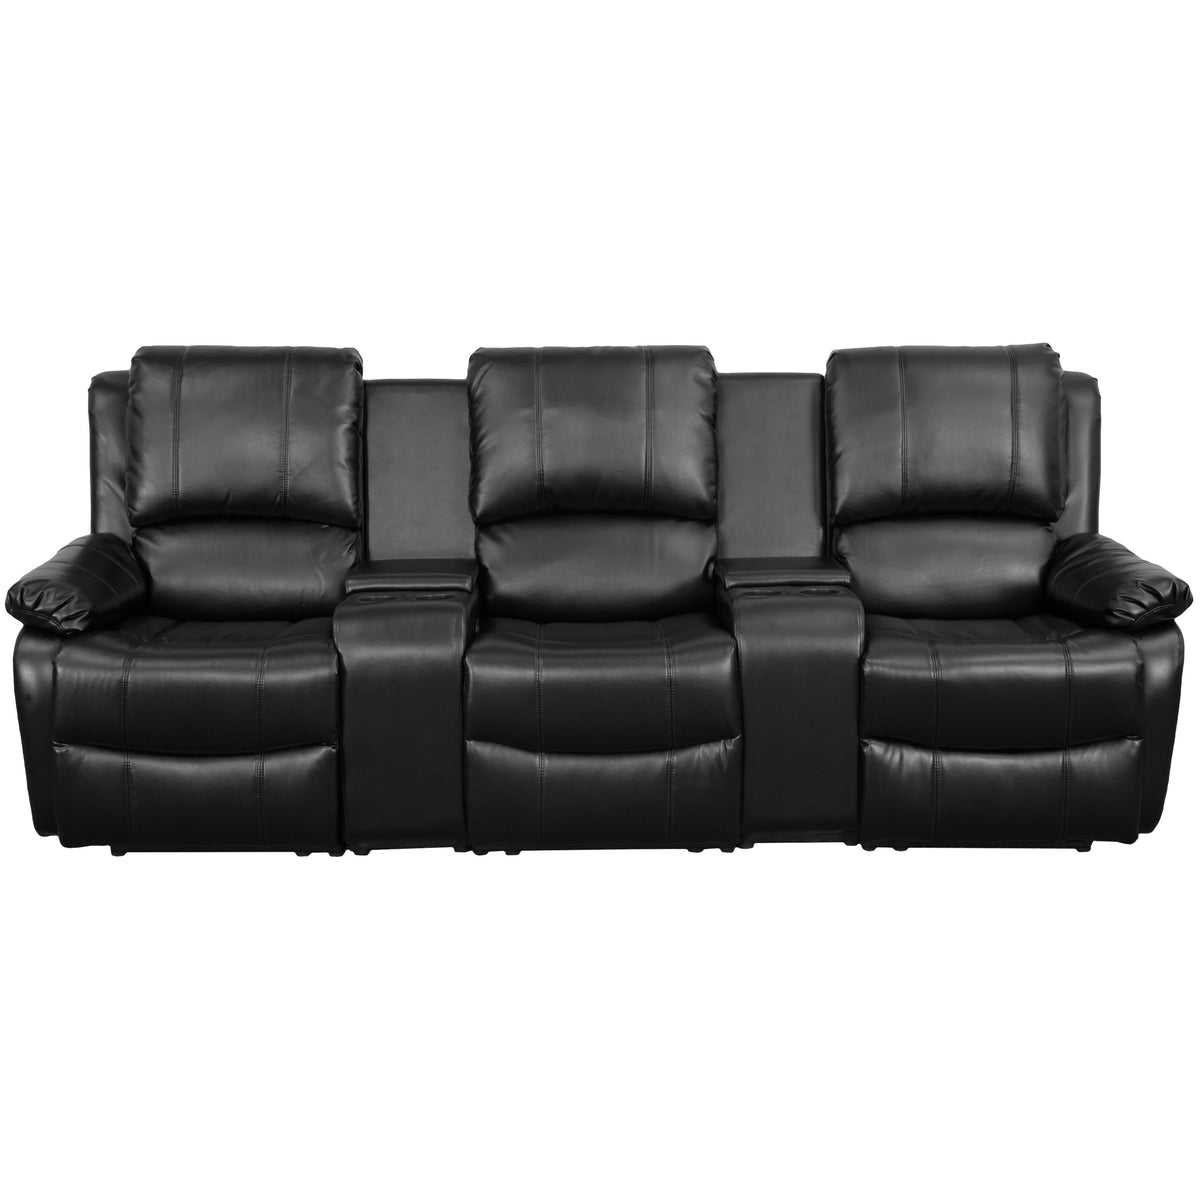 Black |#| 3-Seat Reclining Pillow Back Black LeatherSoft Theater Seating Unit-Cup Holders